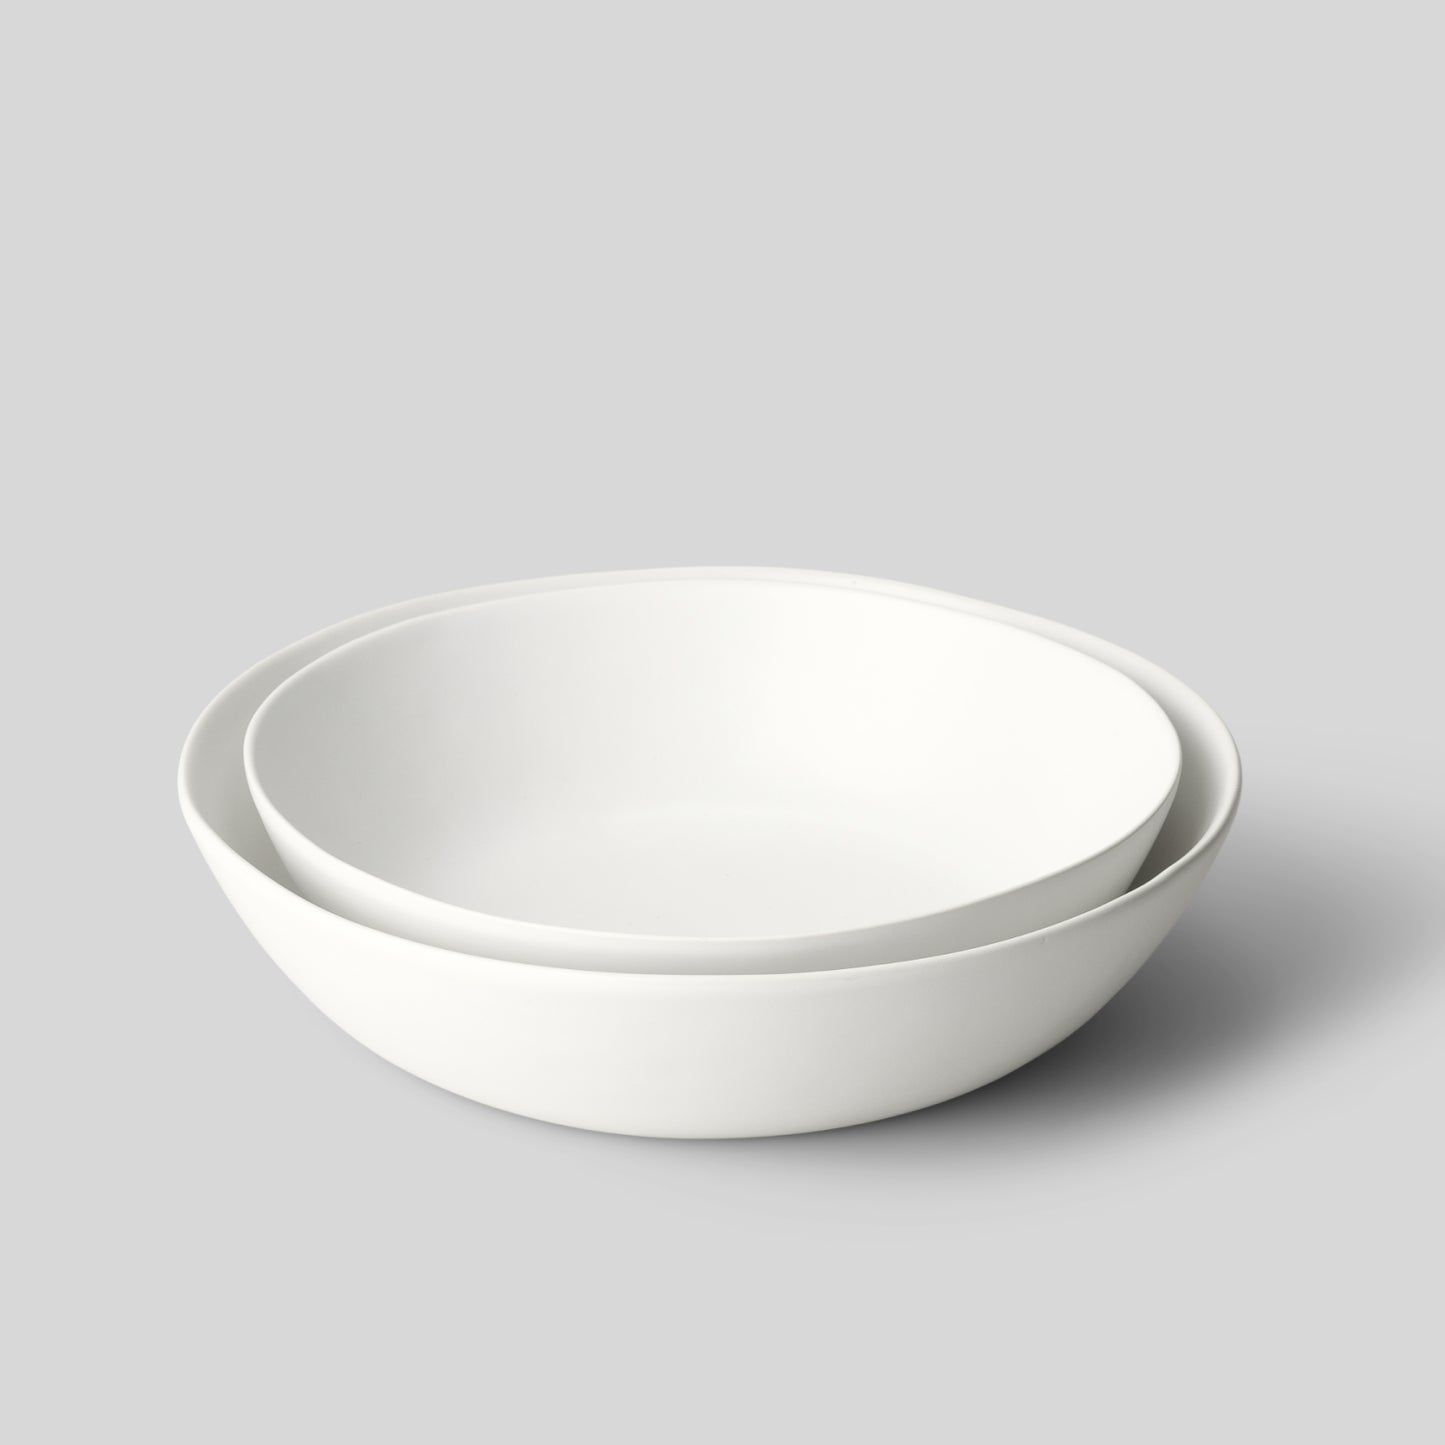 The Low Serving Bowls